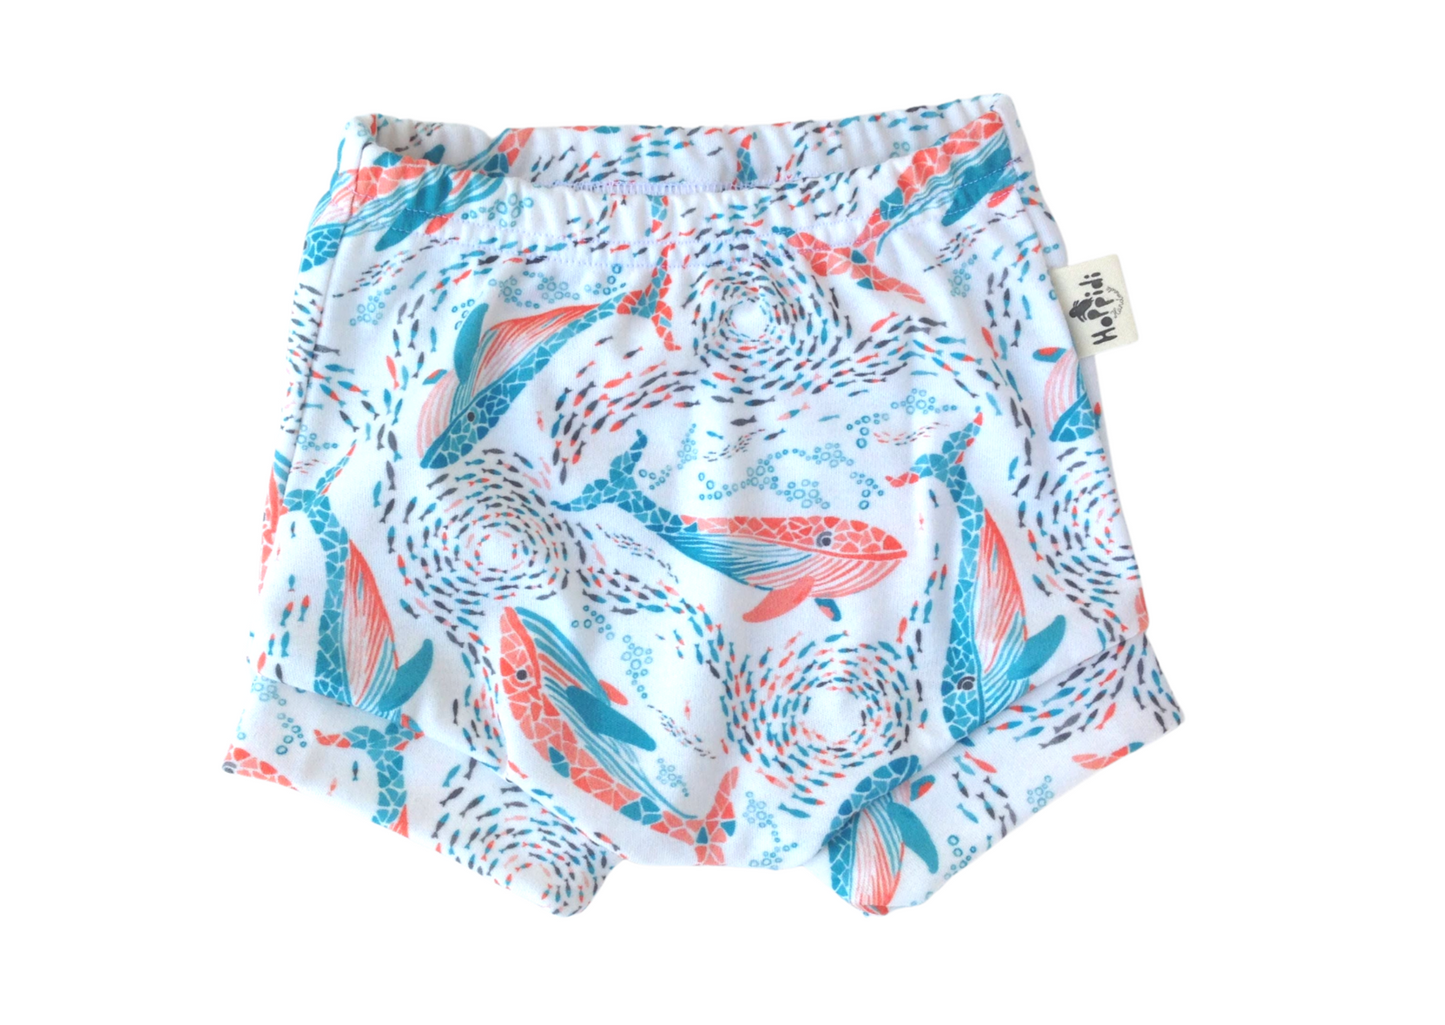 Whales and Fish Swarm Summer Shorts